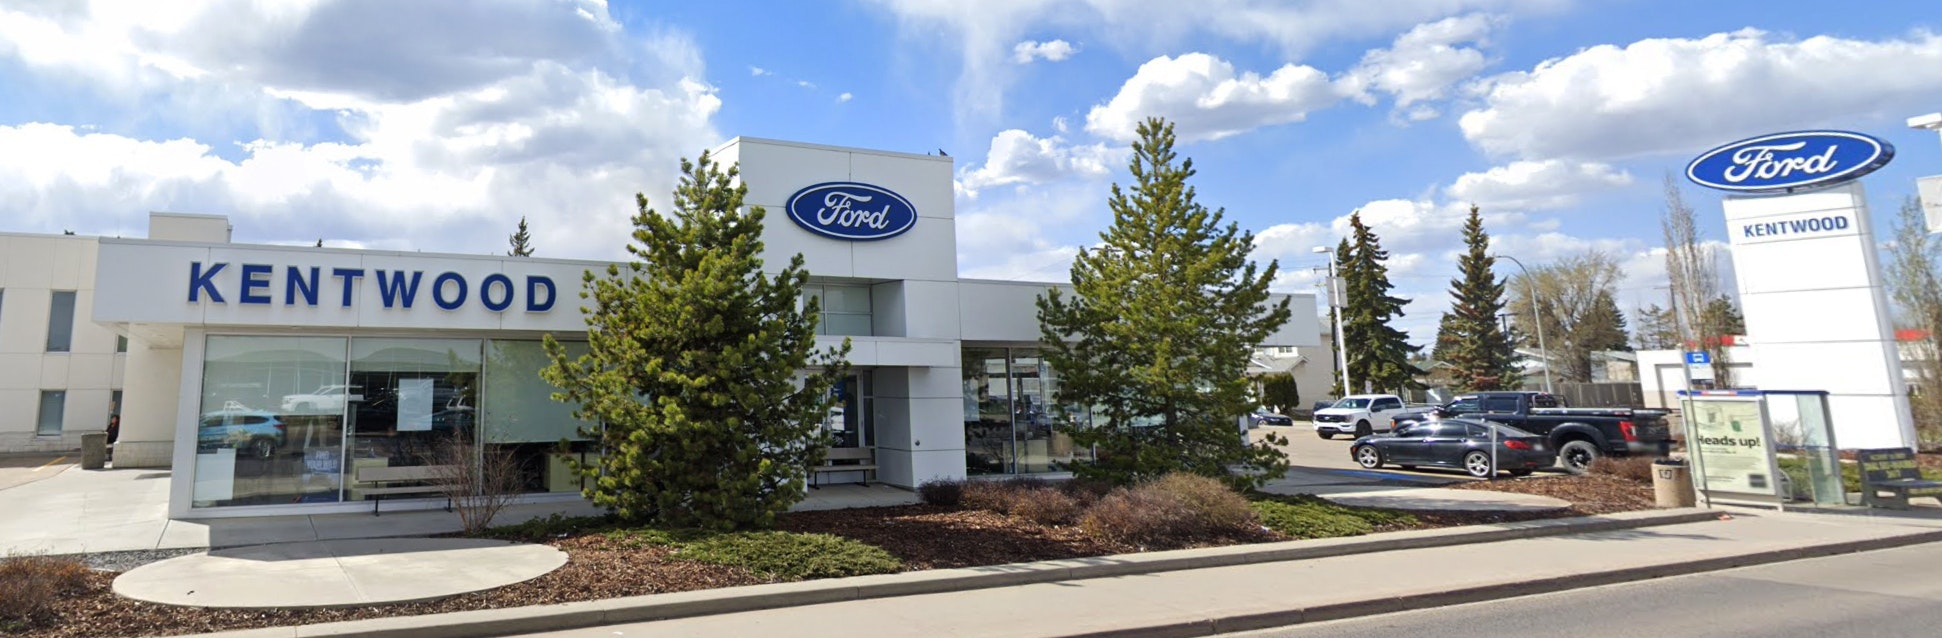 Photo of the outside of the Kentwoord Ford dealership